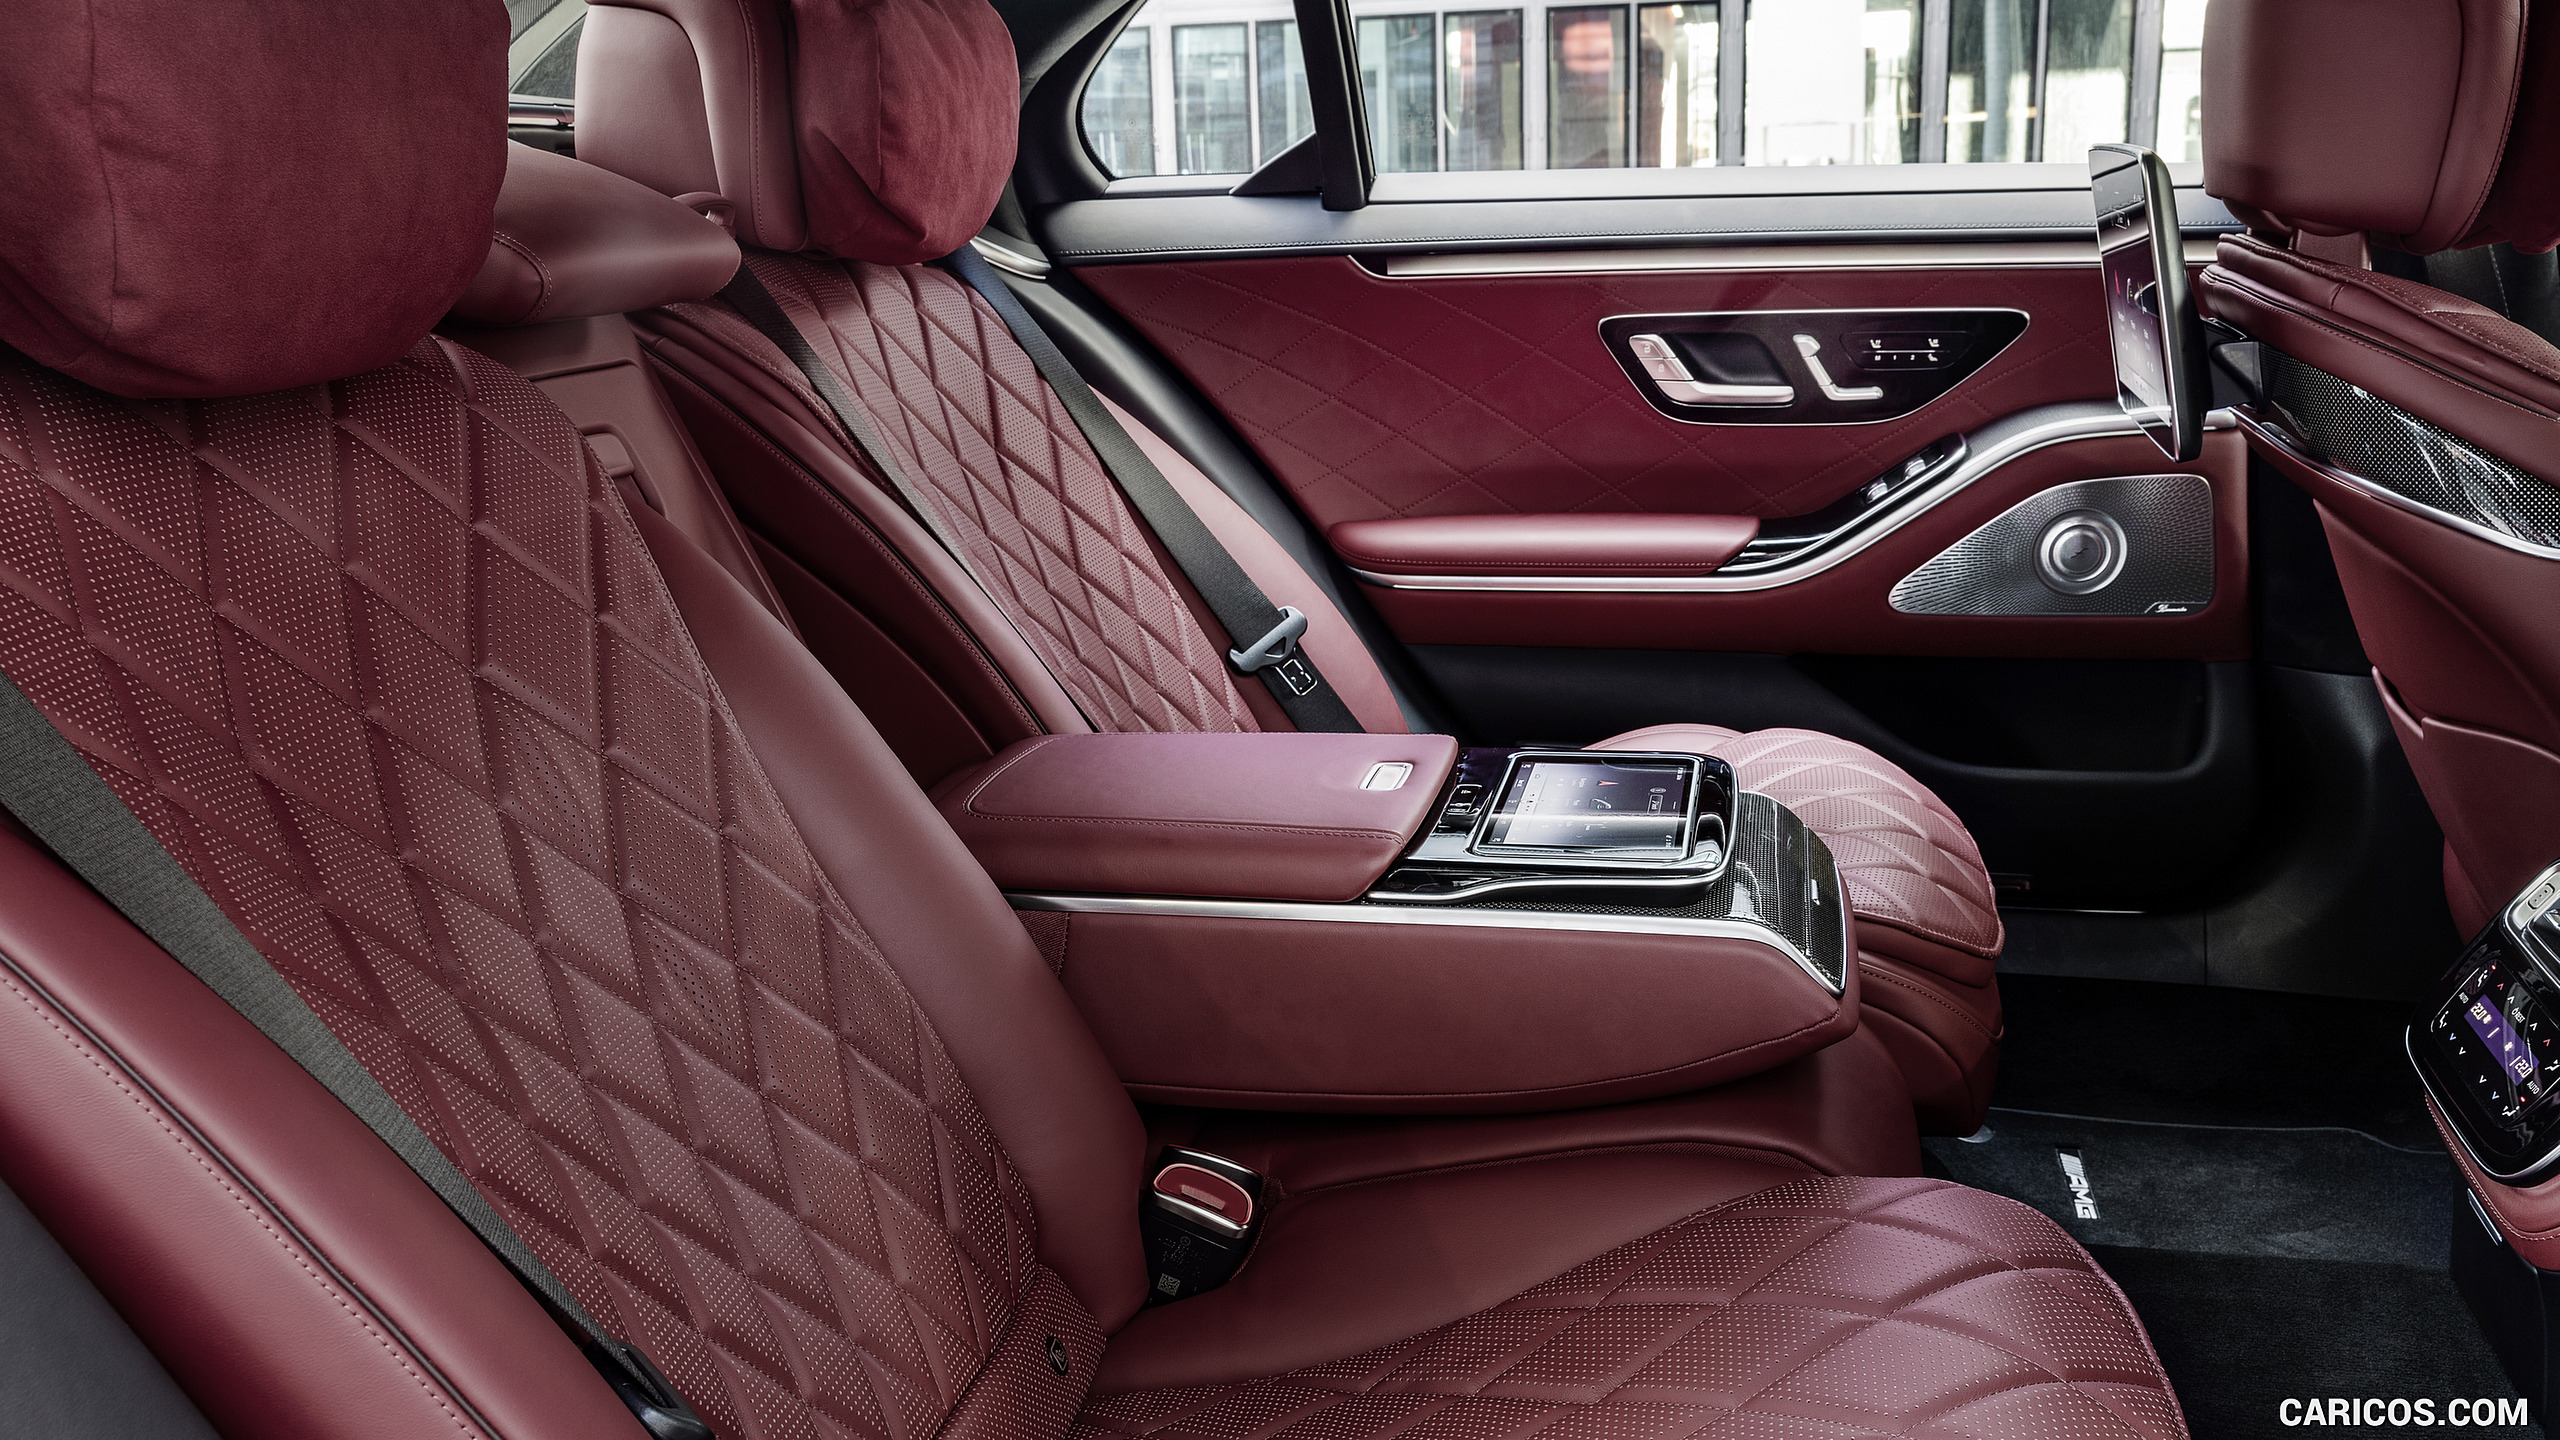 2021 Mercedes-Benz S-Class (Color: Leather Nappa Black/Carmin Red) - Interior, Rear Seats, #41 of 316